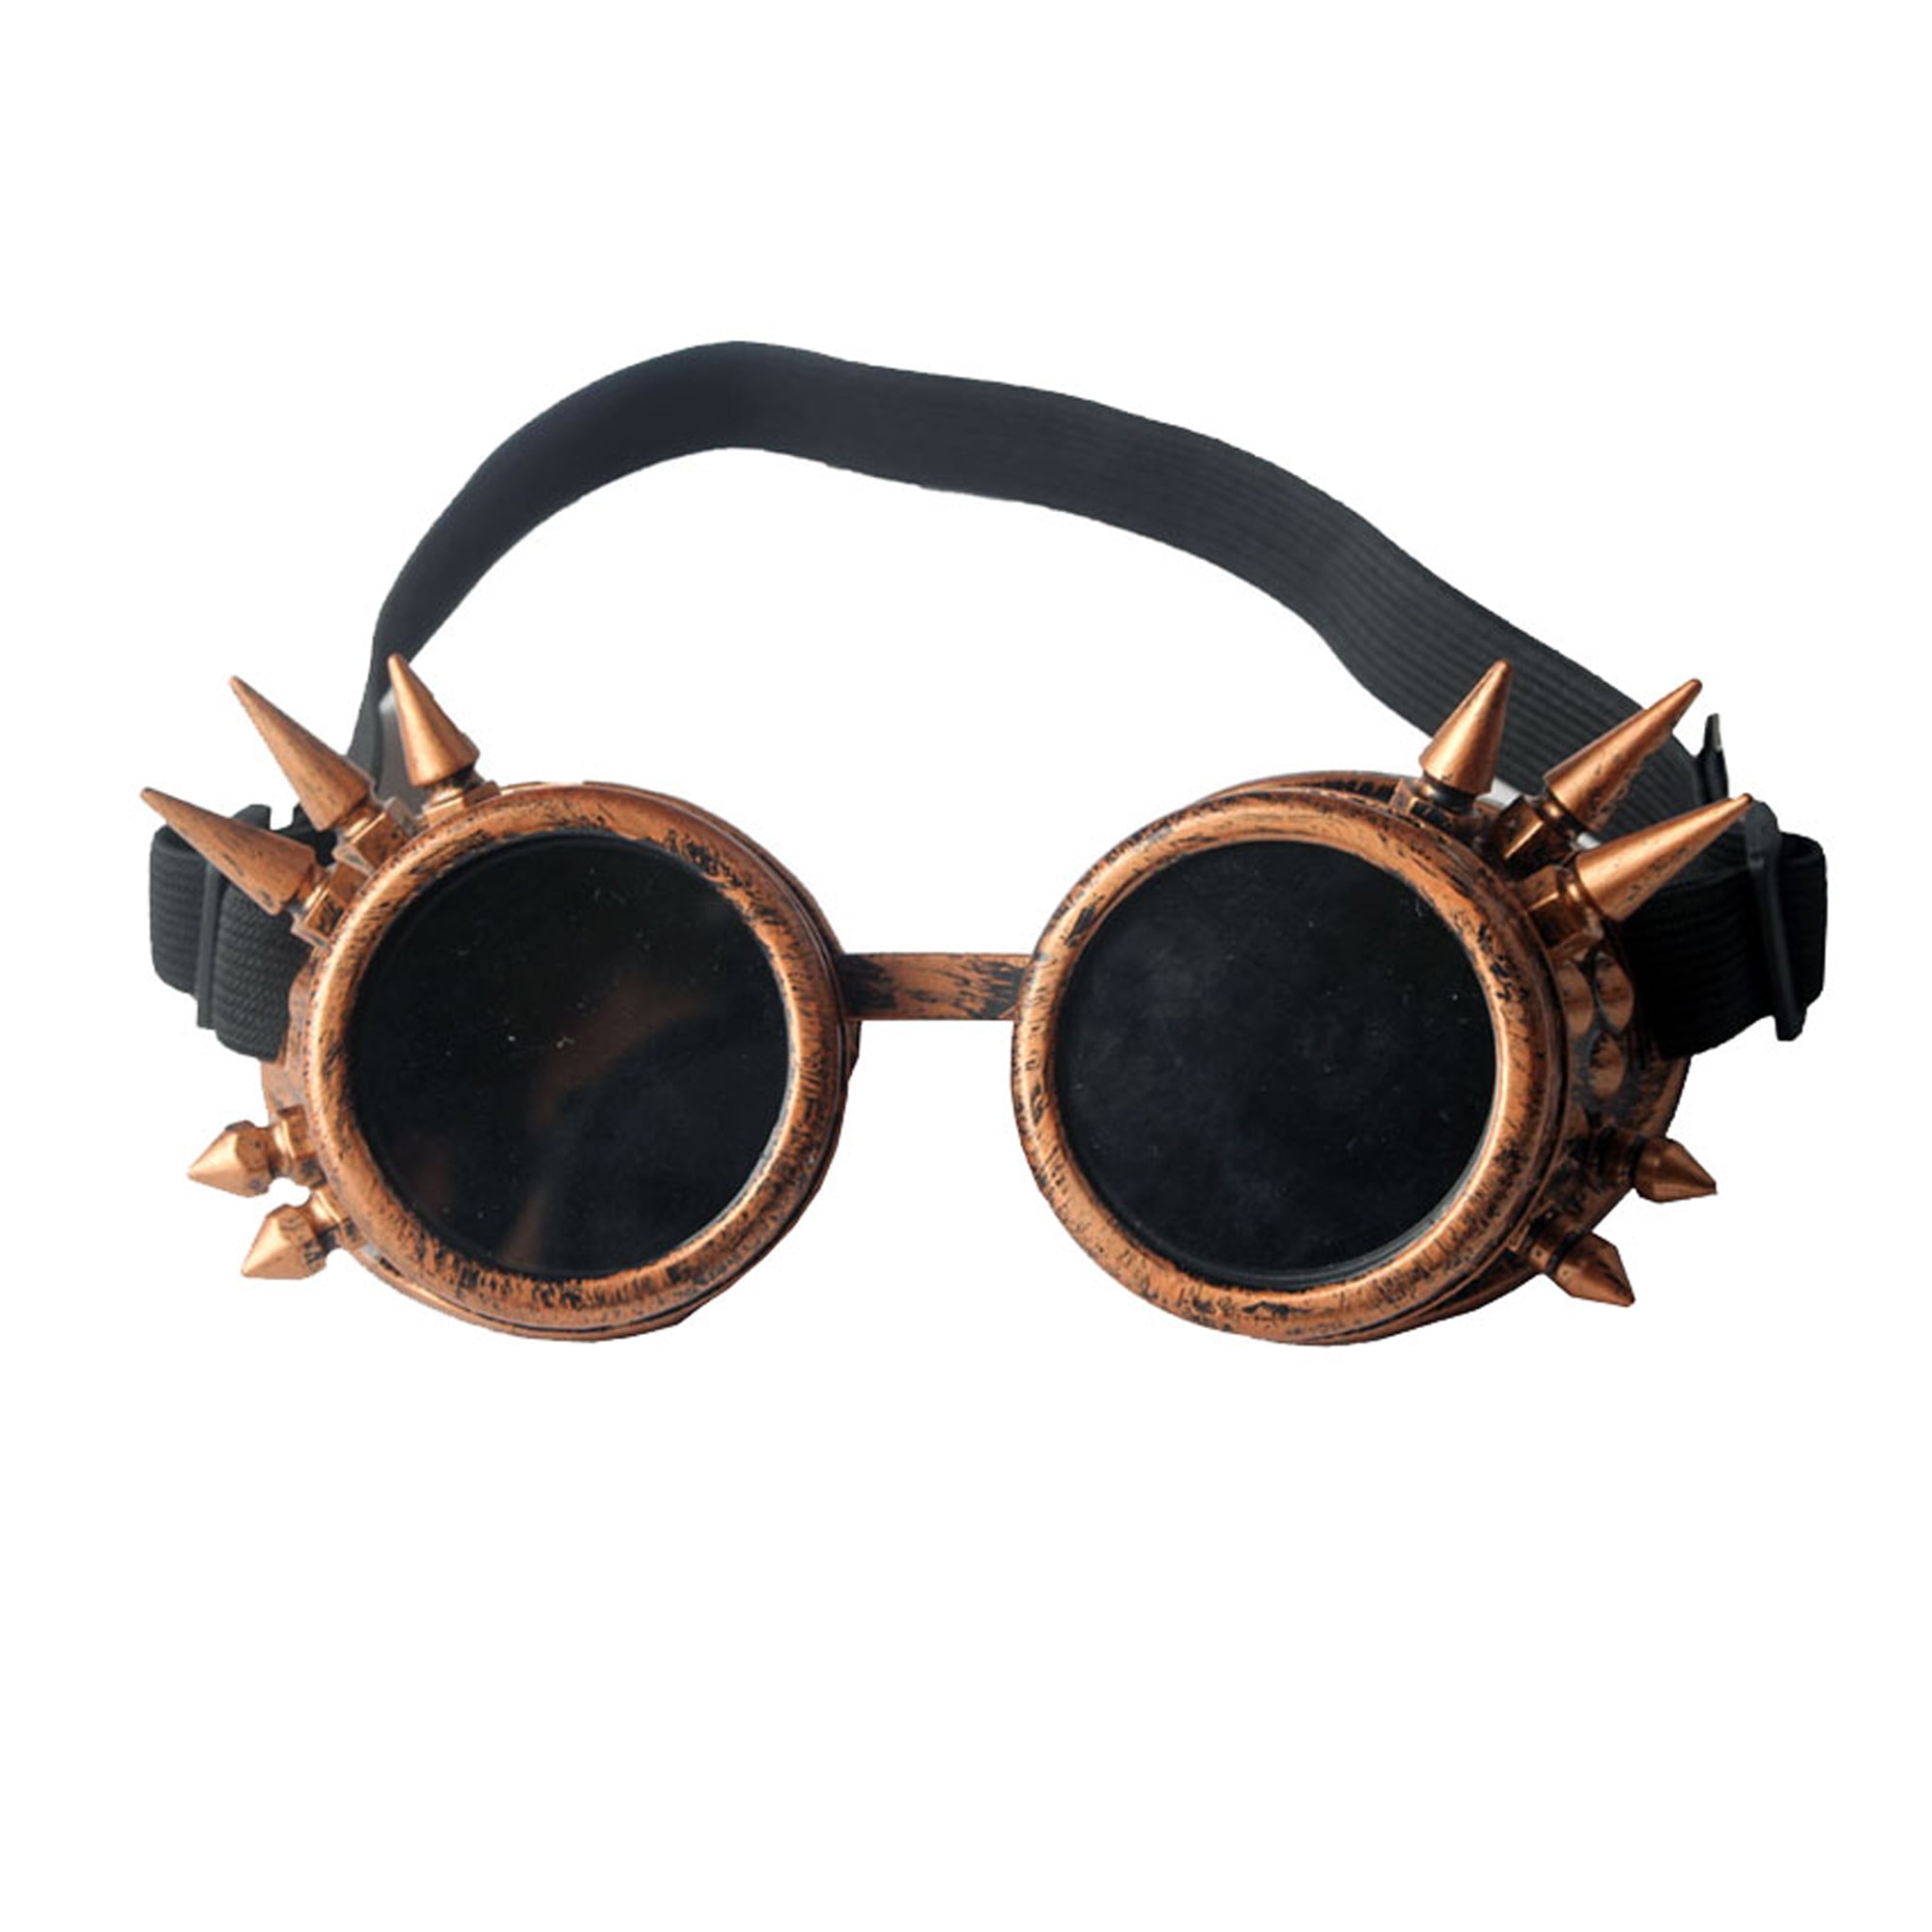 DODOING Spiked Steampunk Goggles Vintage Glasses Welding Cyber Punk Gothic Goggles